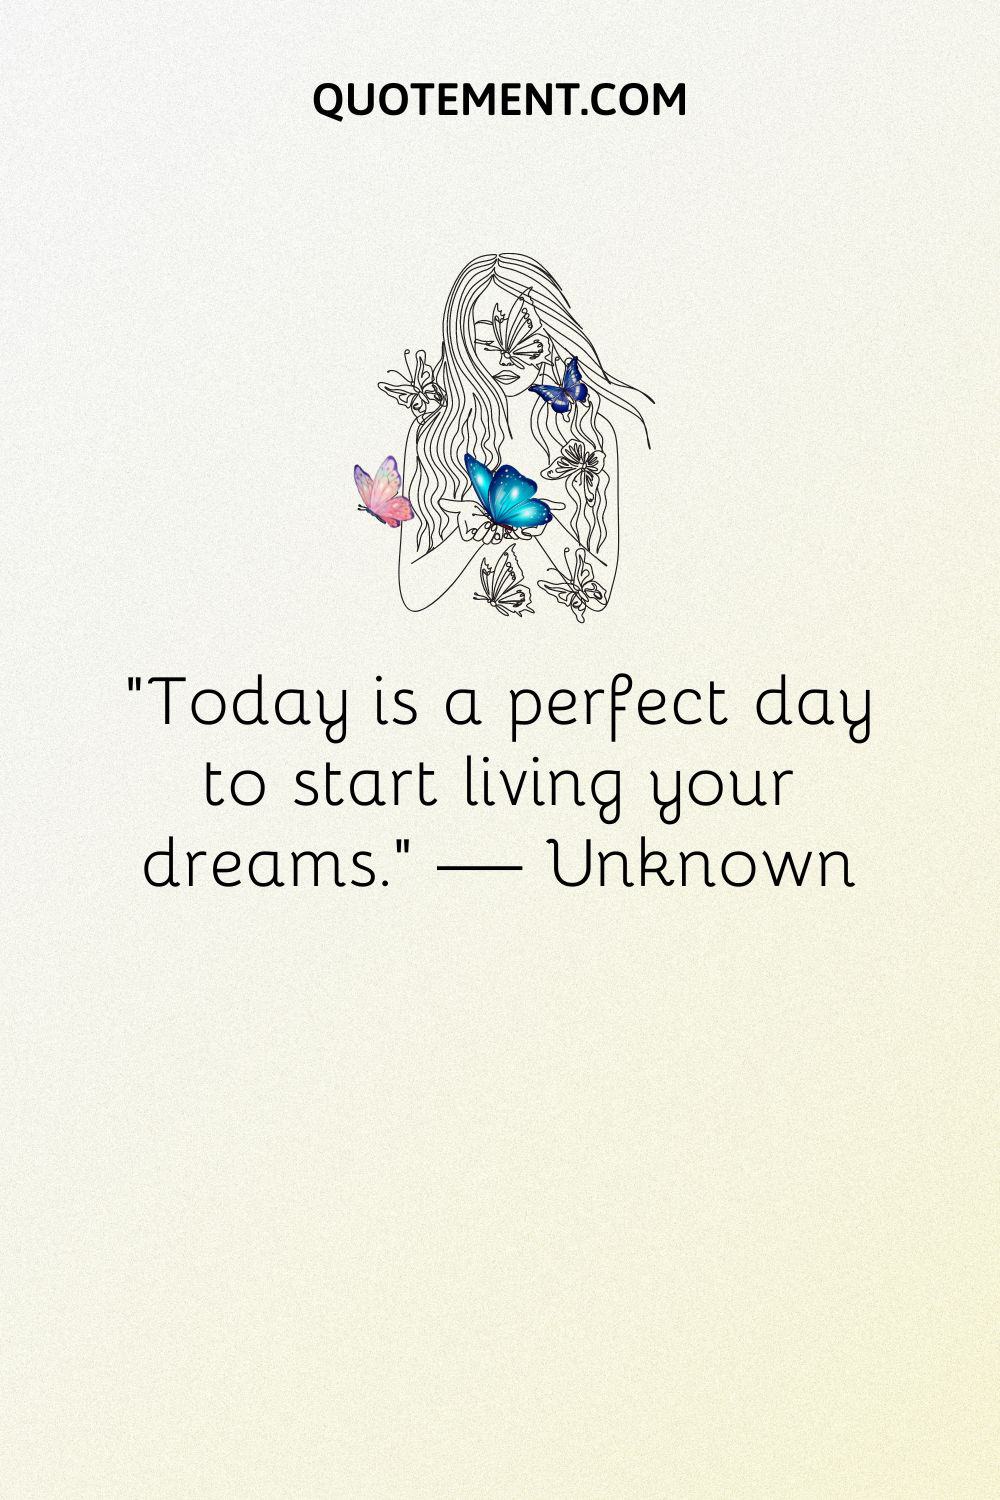 girl covered by butterflies image representing living a dream quote